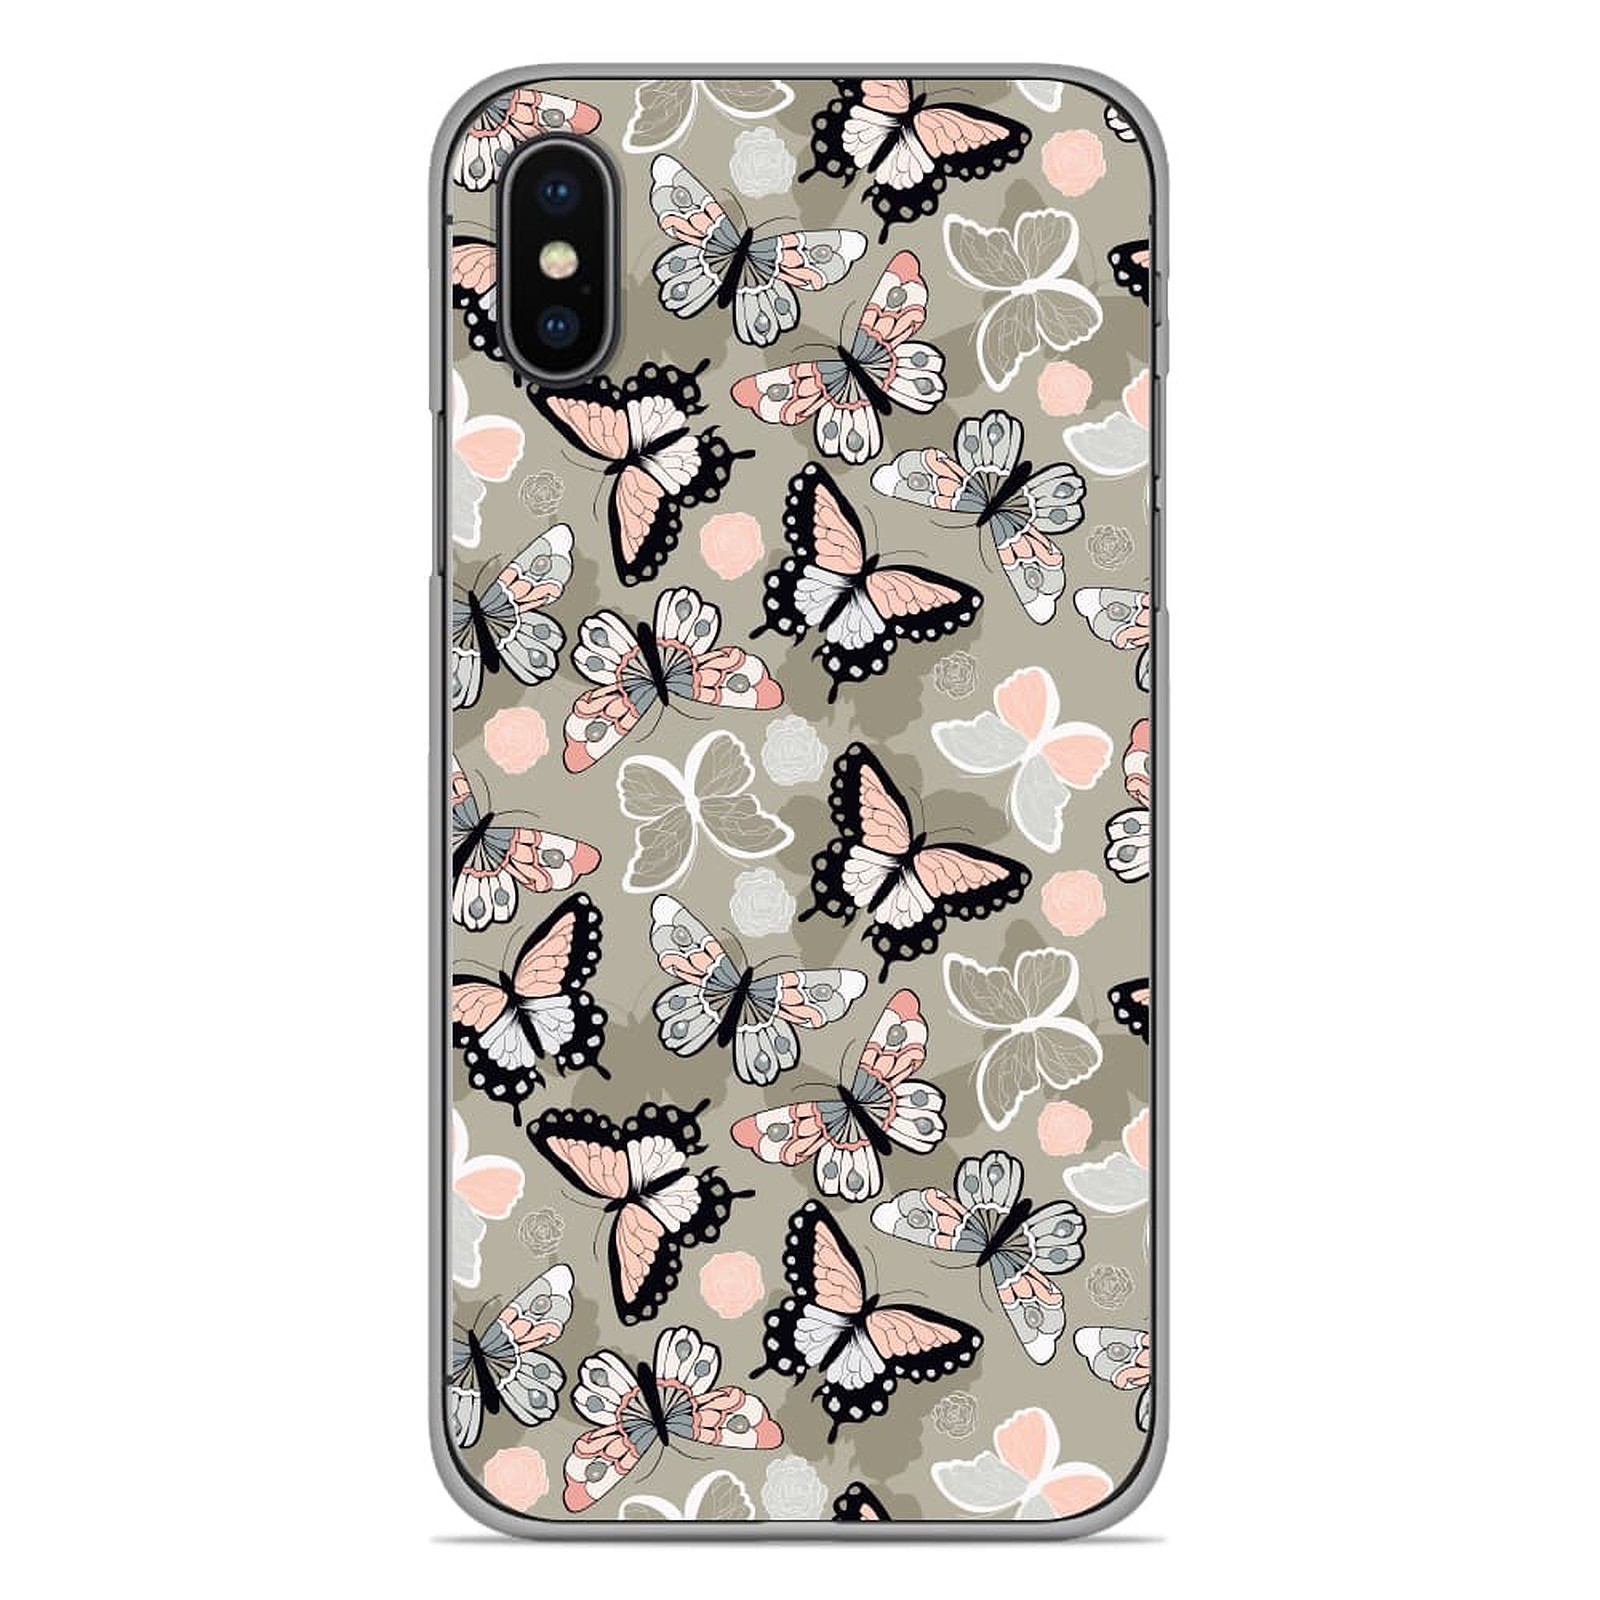 1001 Coques Coque silicone gel Apple iPhone X / XS motif Papillons Vintage - Coque telephone 1001Coques